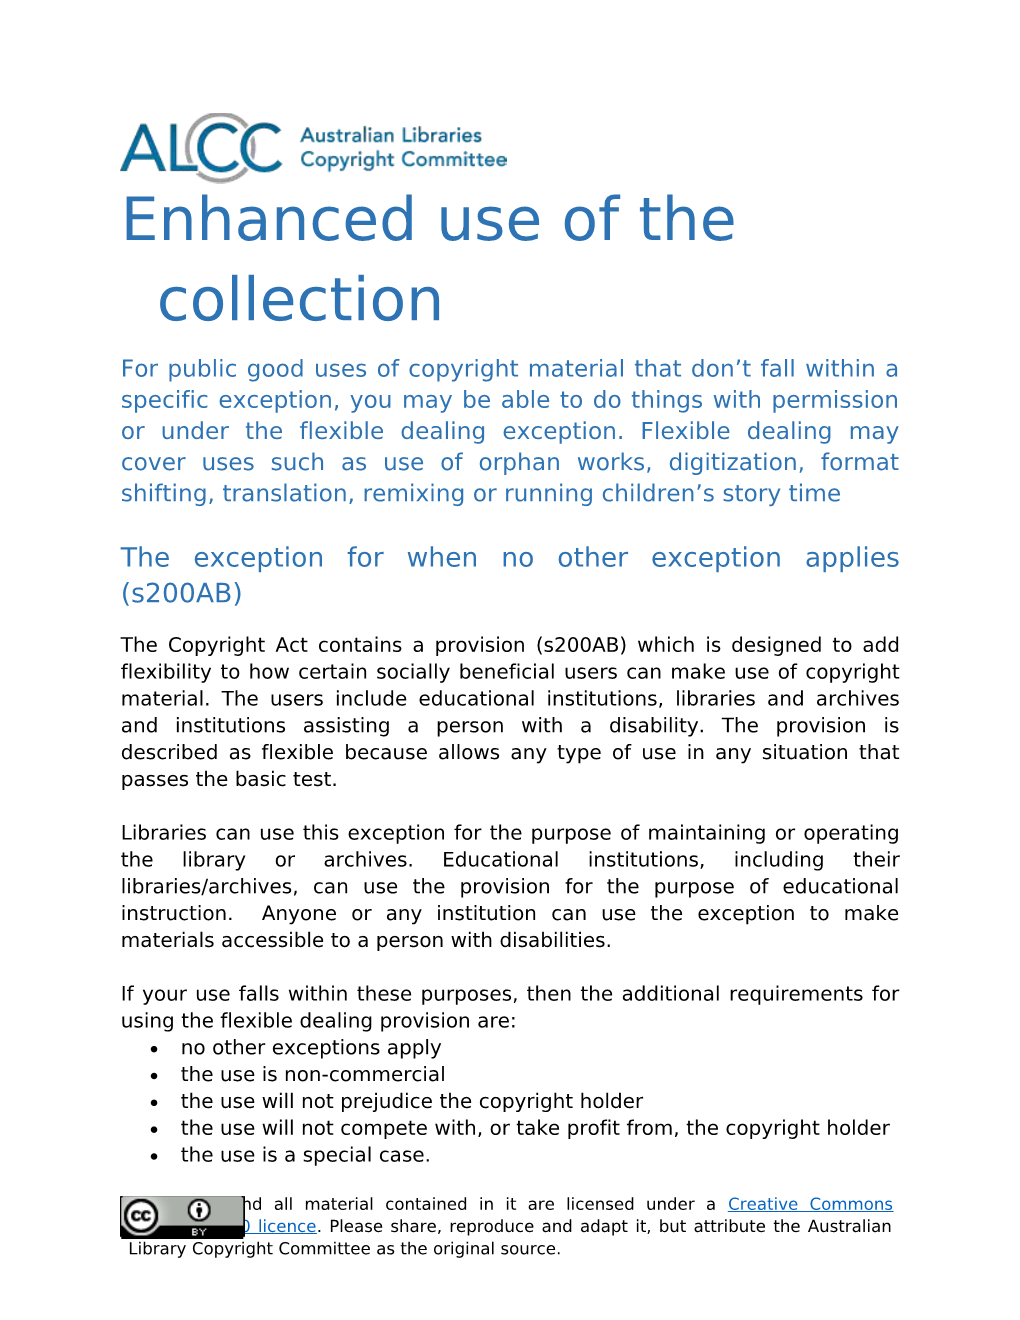 Enhanced Use of the Collection